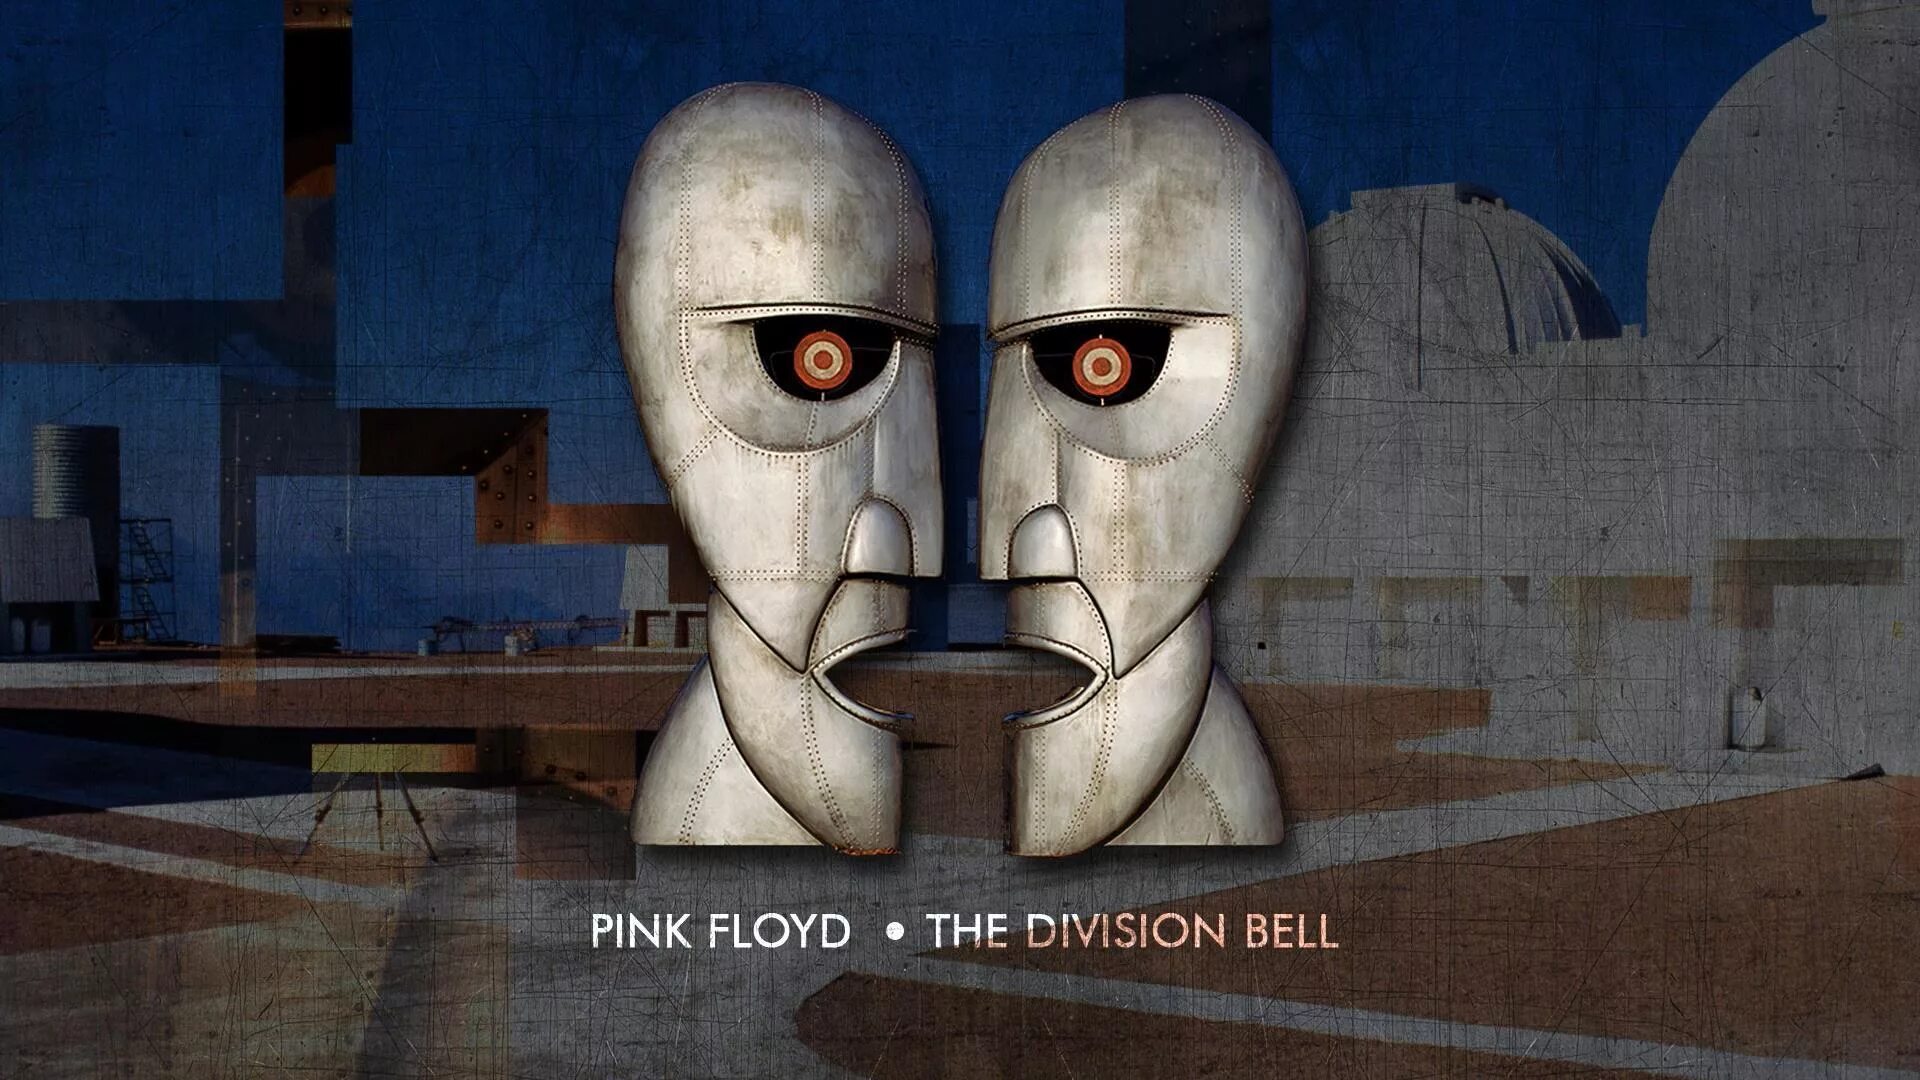 The division bell. Обложки Пинк Флойд Division Bell. Pink Floyd 1994 the Division Bell. Pink Floyd the Division Bell 1994 обложка. Pink Floyd the Division Bell обложка.